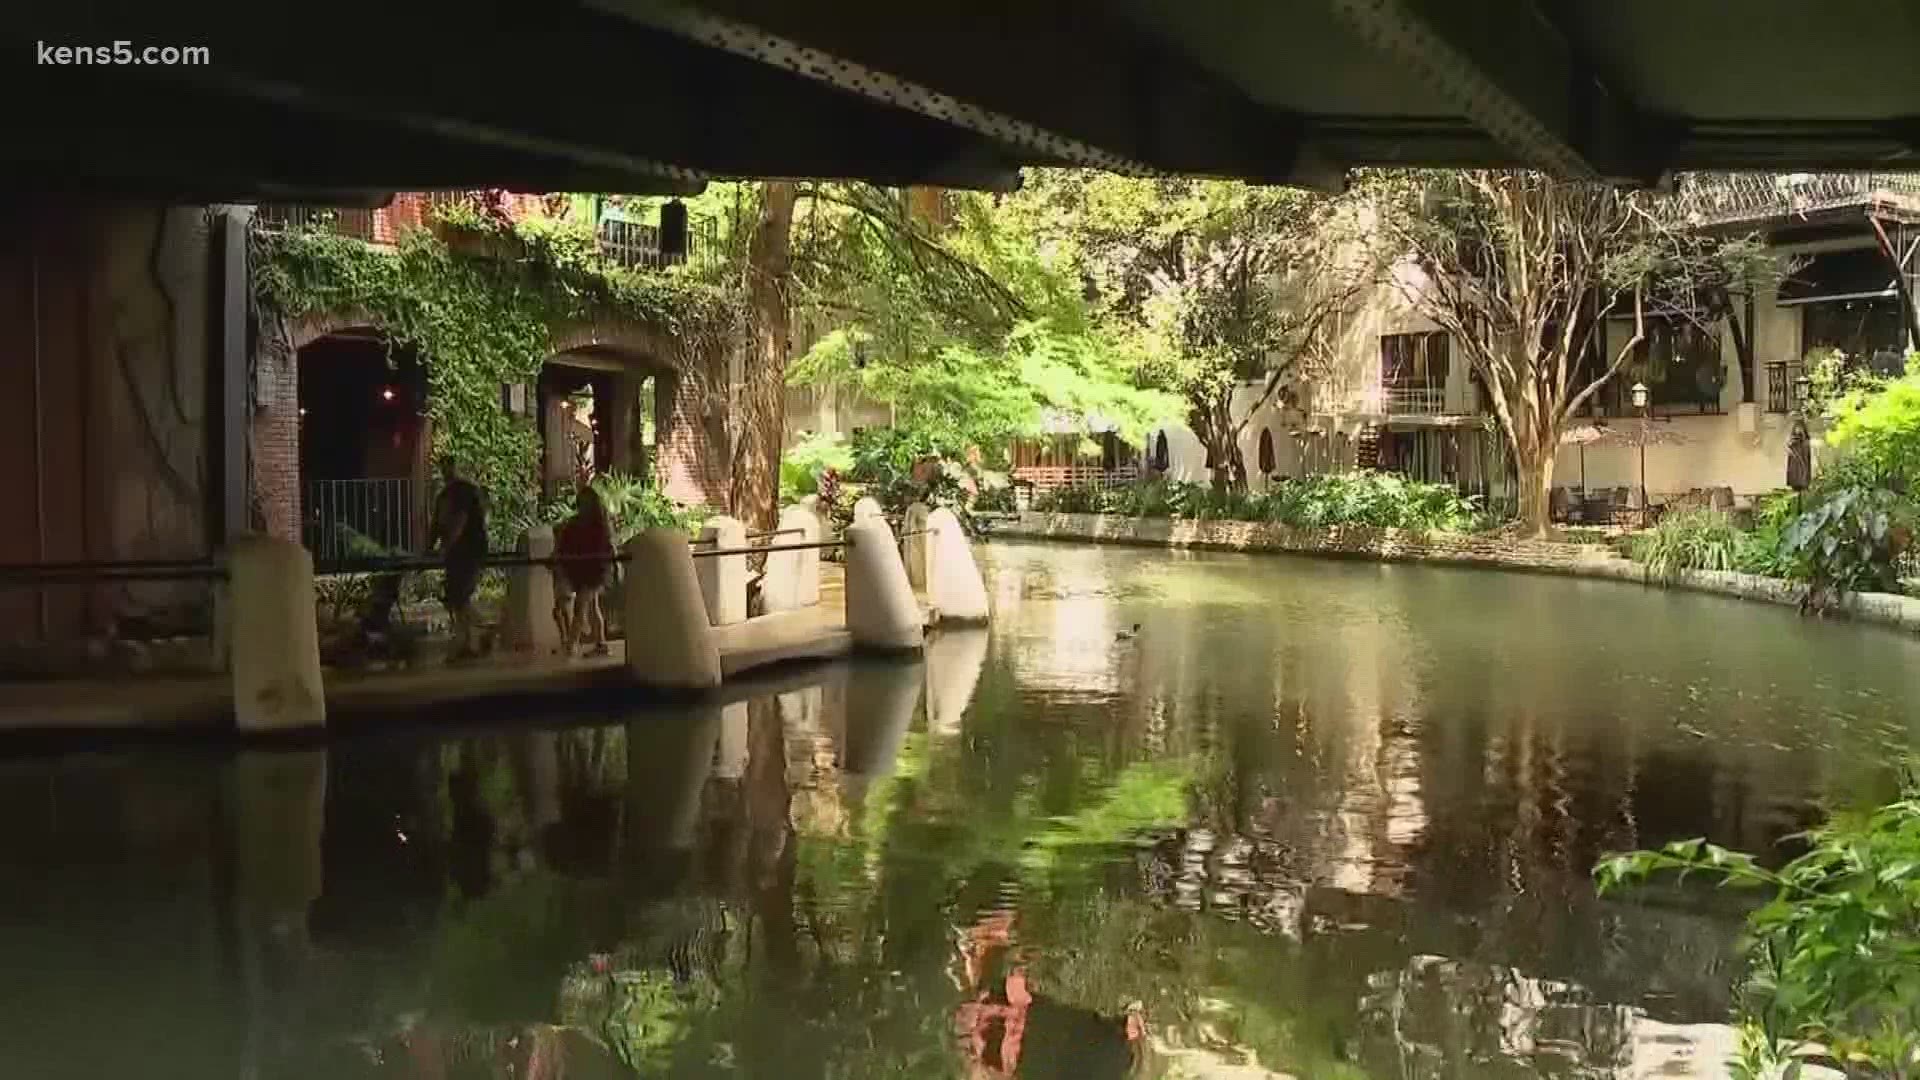 The San Antonio River Walk is back in business. Monday, plans were announced to reopen, including what will be done to keep everything clean during the pandemic.